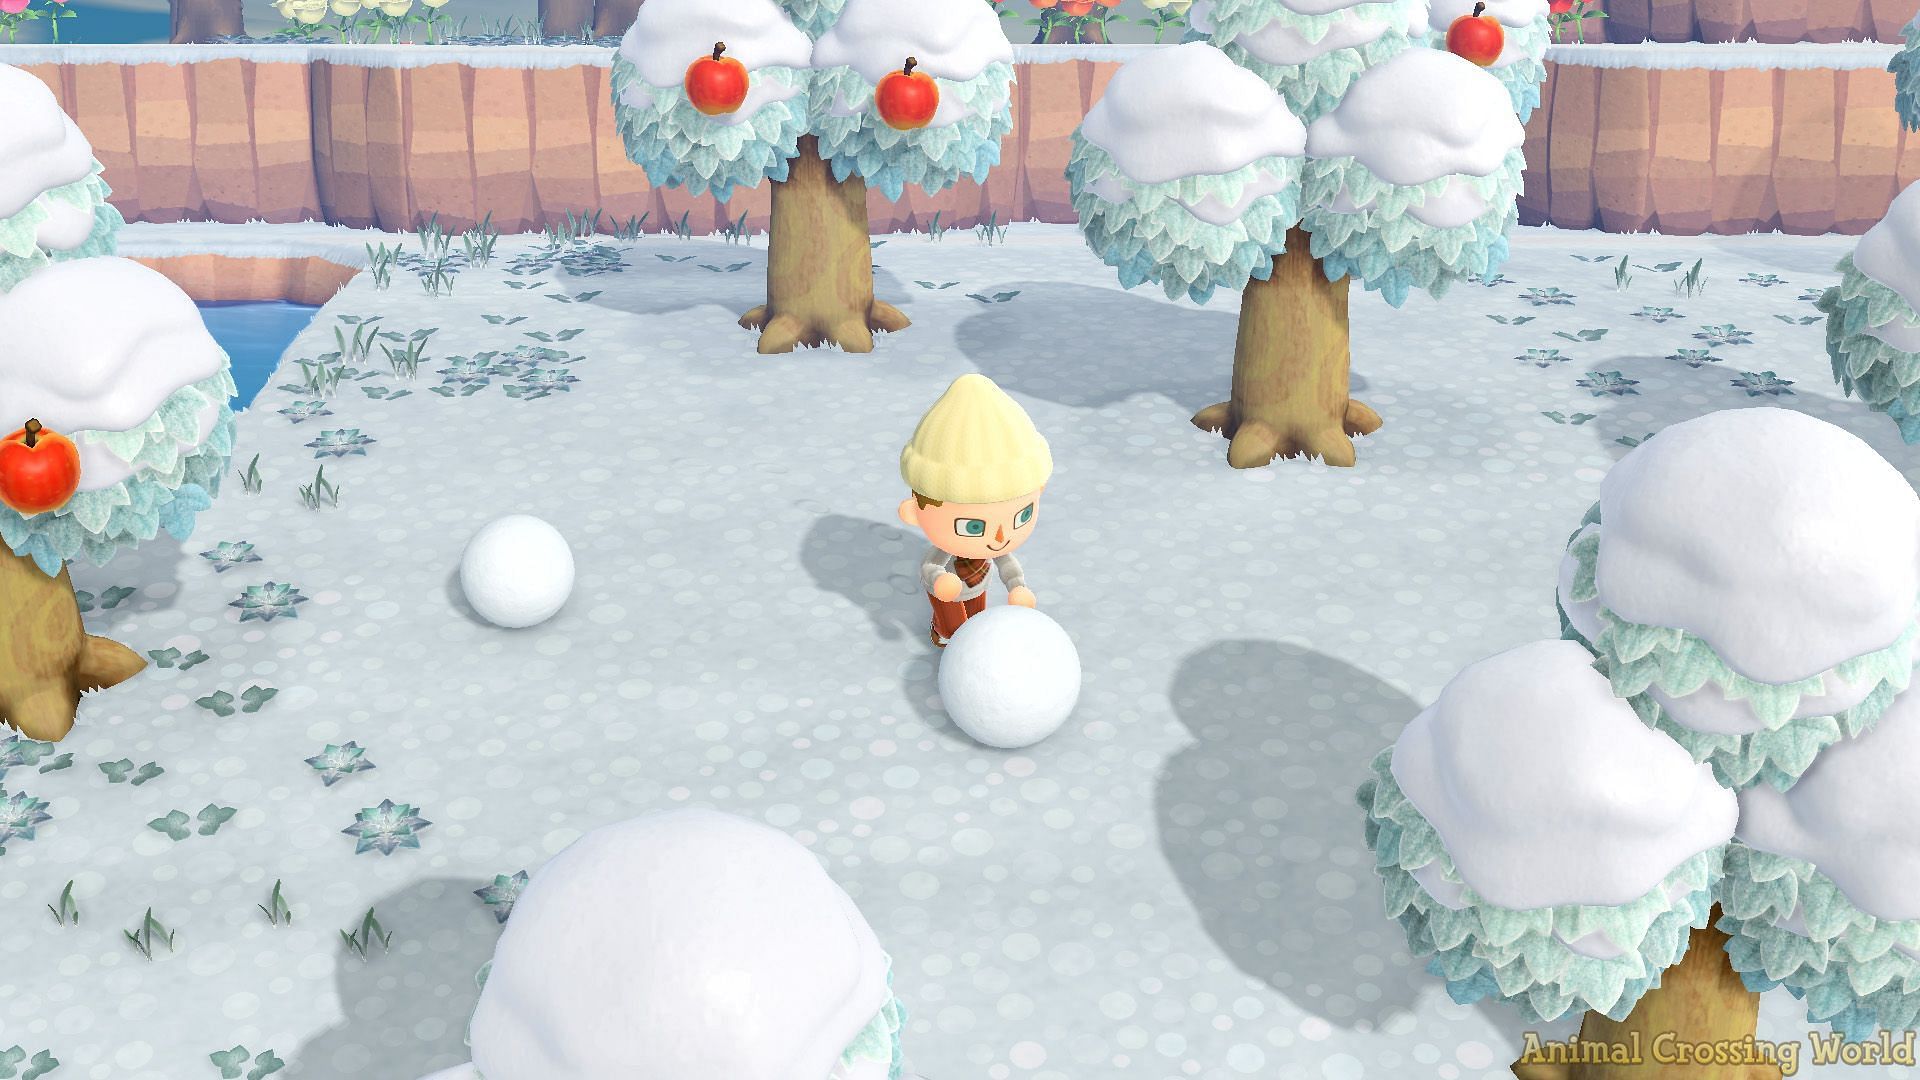 Snowfall affects a lot of gameplay in Animal Crossing (Image via Animal Crossing World)